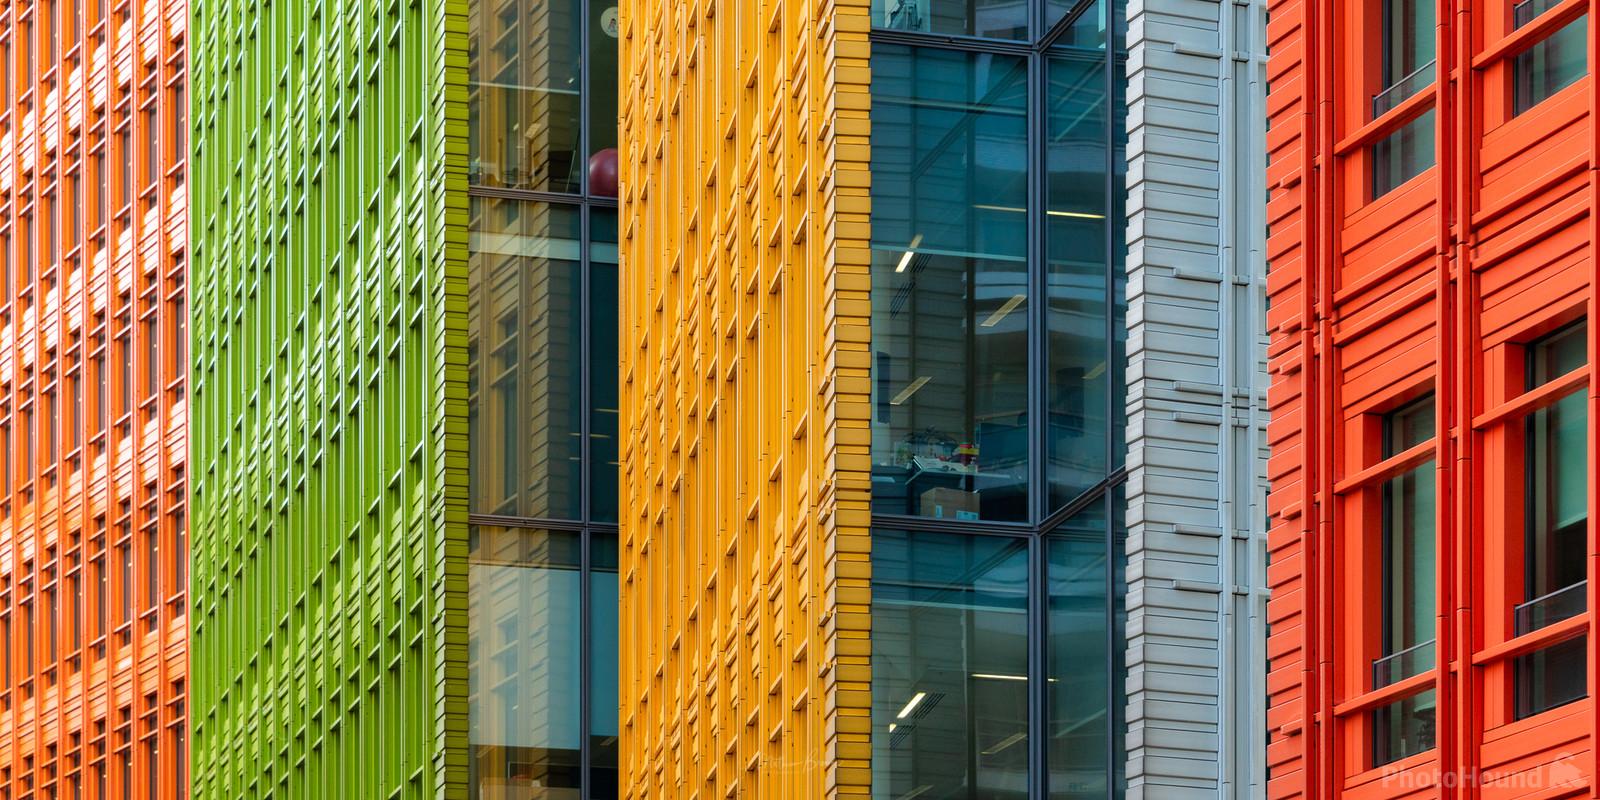 Image of Central St Giles by Mathew Browne